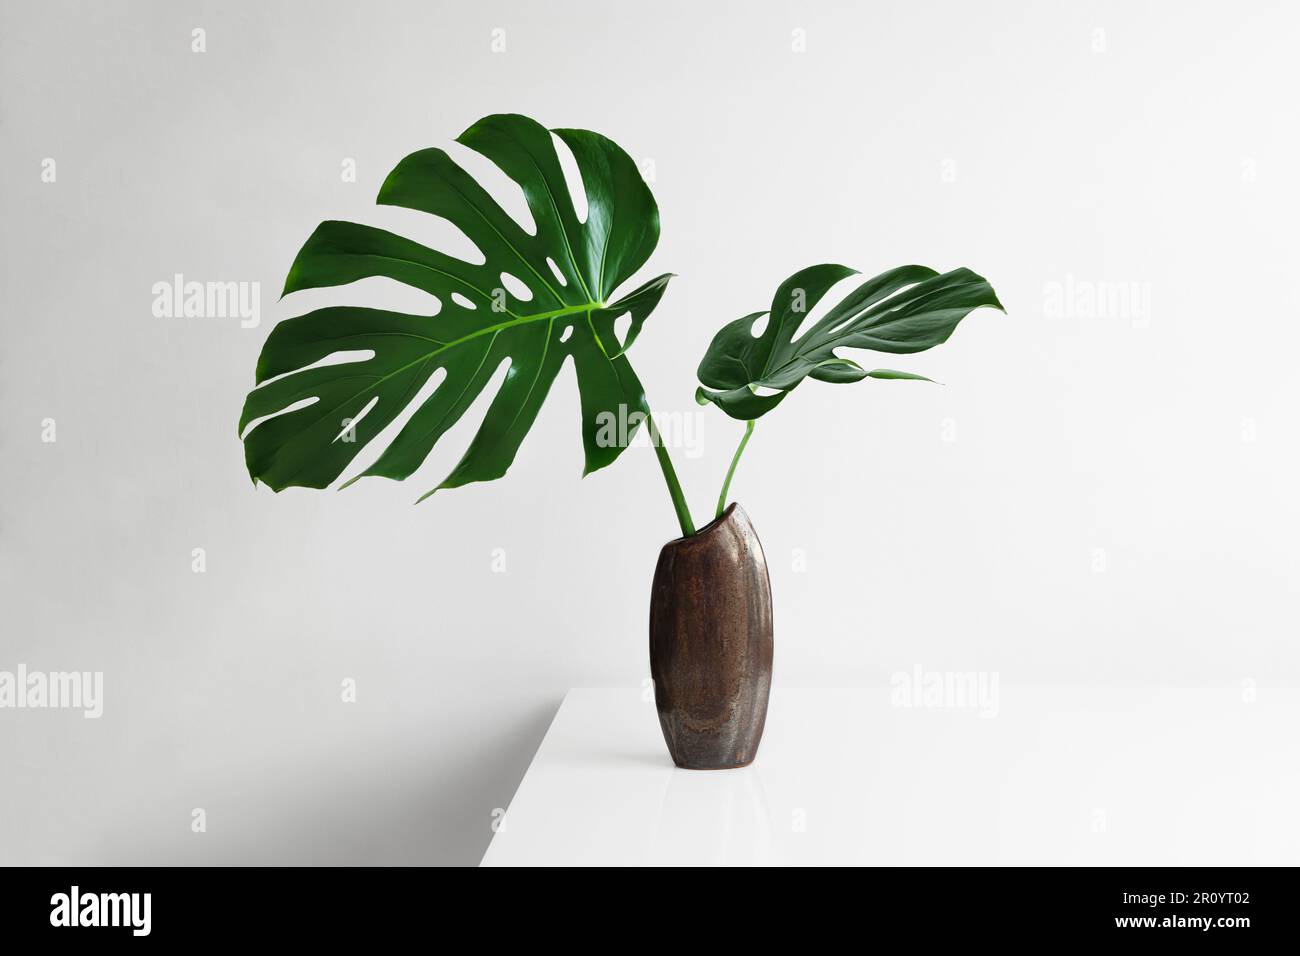 Beautiful leaves of Swiss cheese plant or Monstera deliciosa in a brown vase on a light background, minimal creative home decor concept Stock Photo